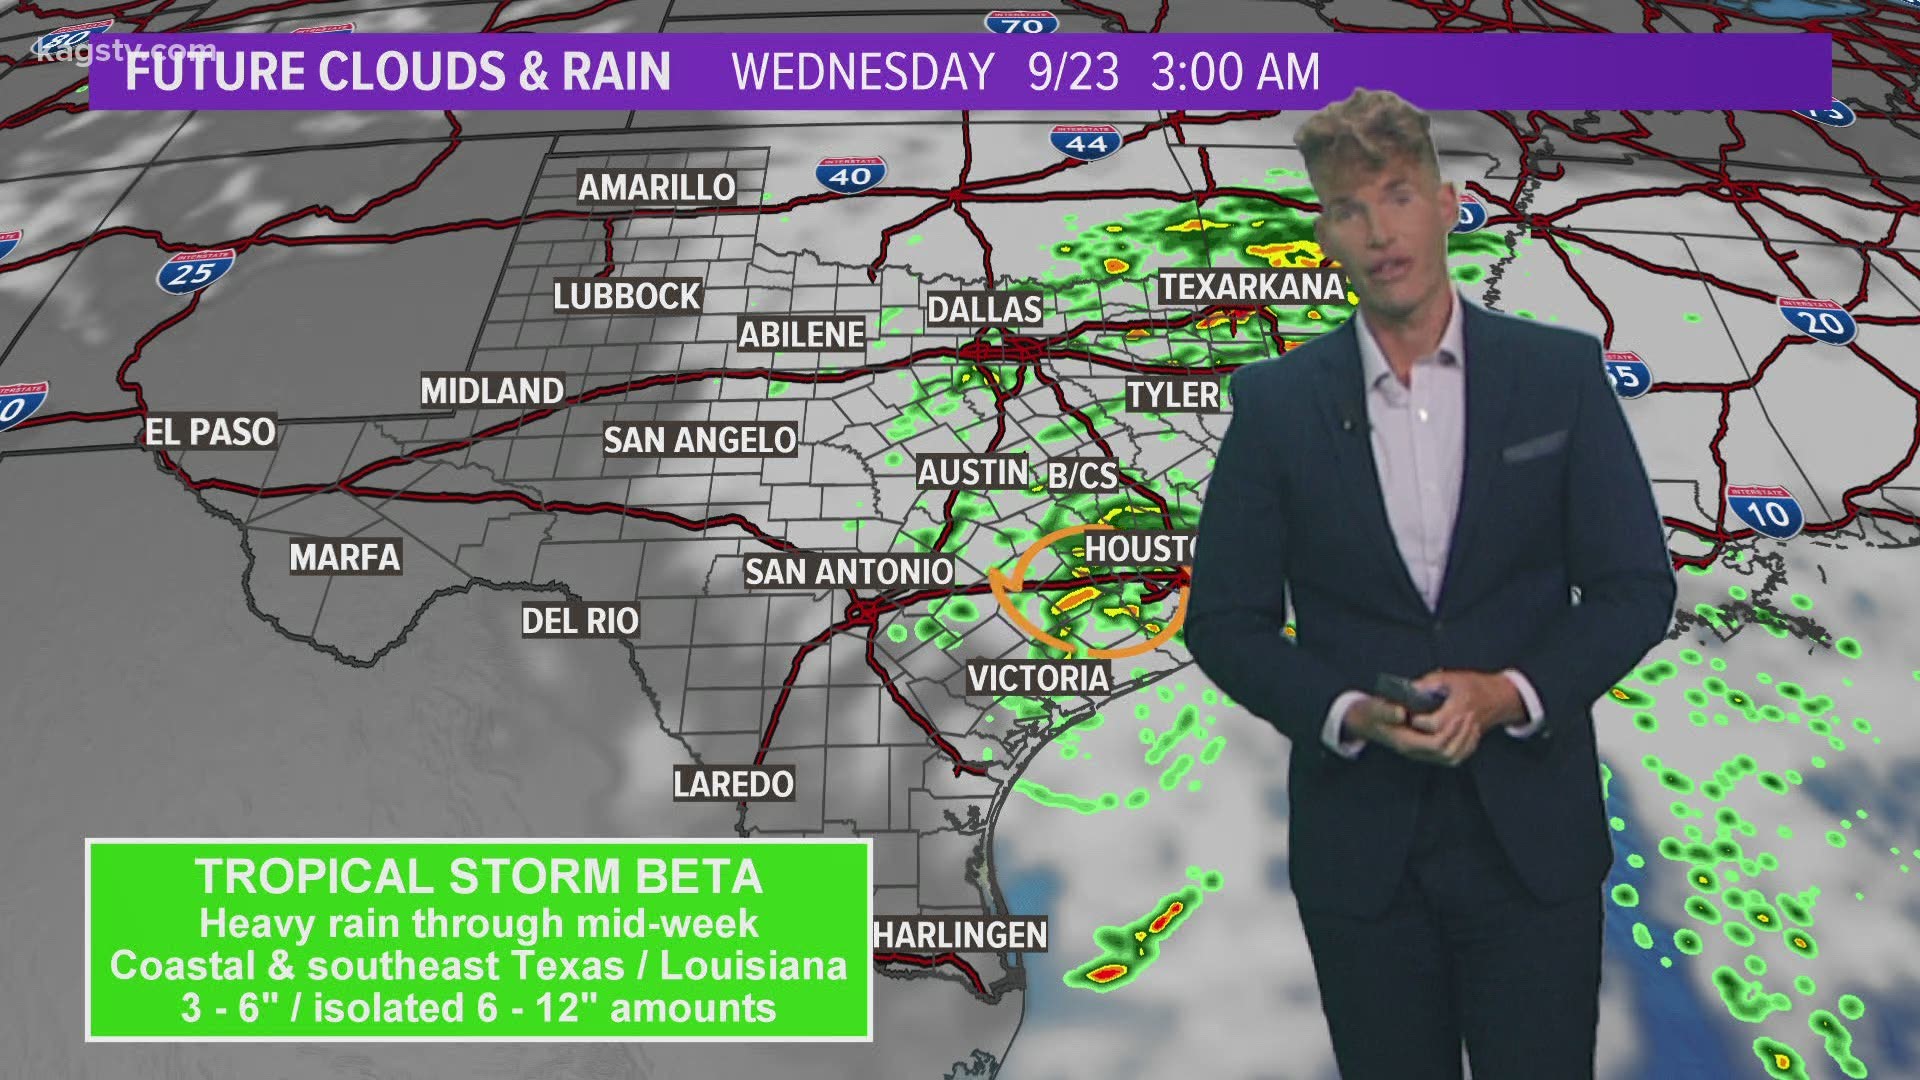 Beta forecast to make landfall, causing flooding in parts of Texas and Louisiana.